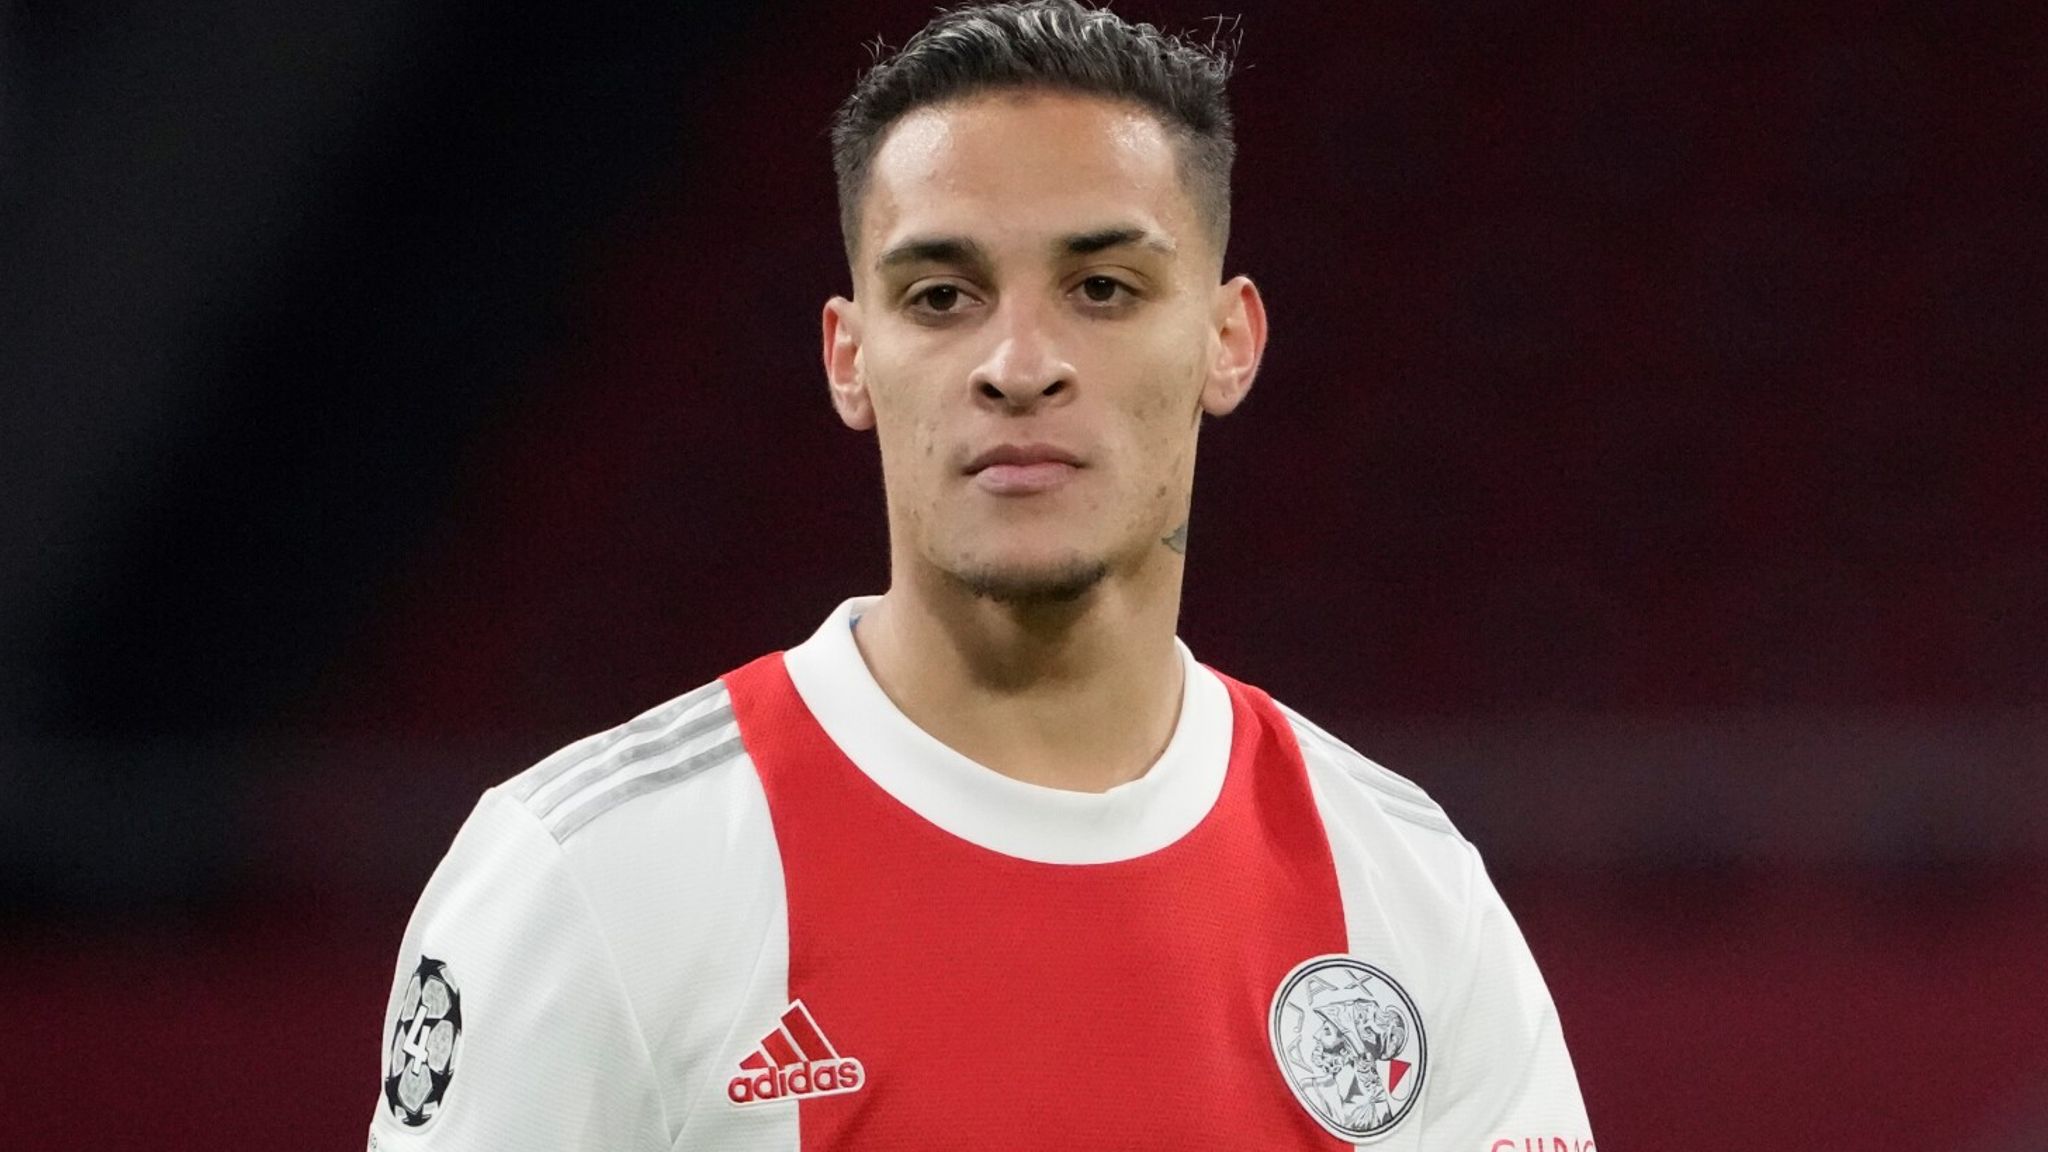 Ajax player Antony of Brazil during a Champions League group C soccer match between Ajax and Sporting CP, at the at the Johan Cruyff ArenA in Amsterdam, Netherlands, Tuesday, Dec. 7, 2021. (AP Photo/Peter Dejong)